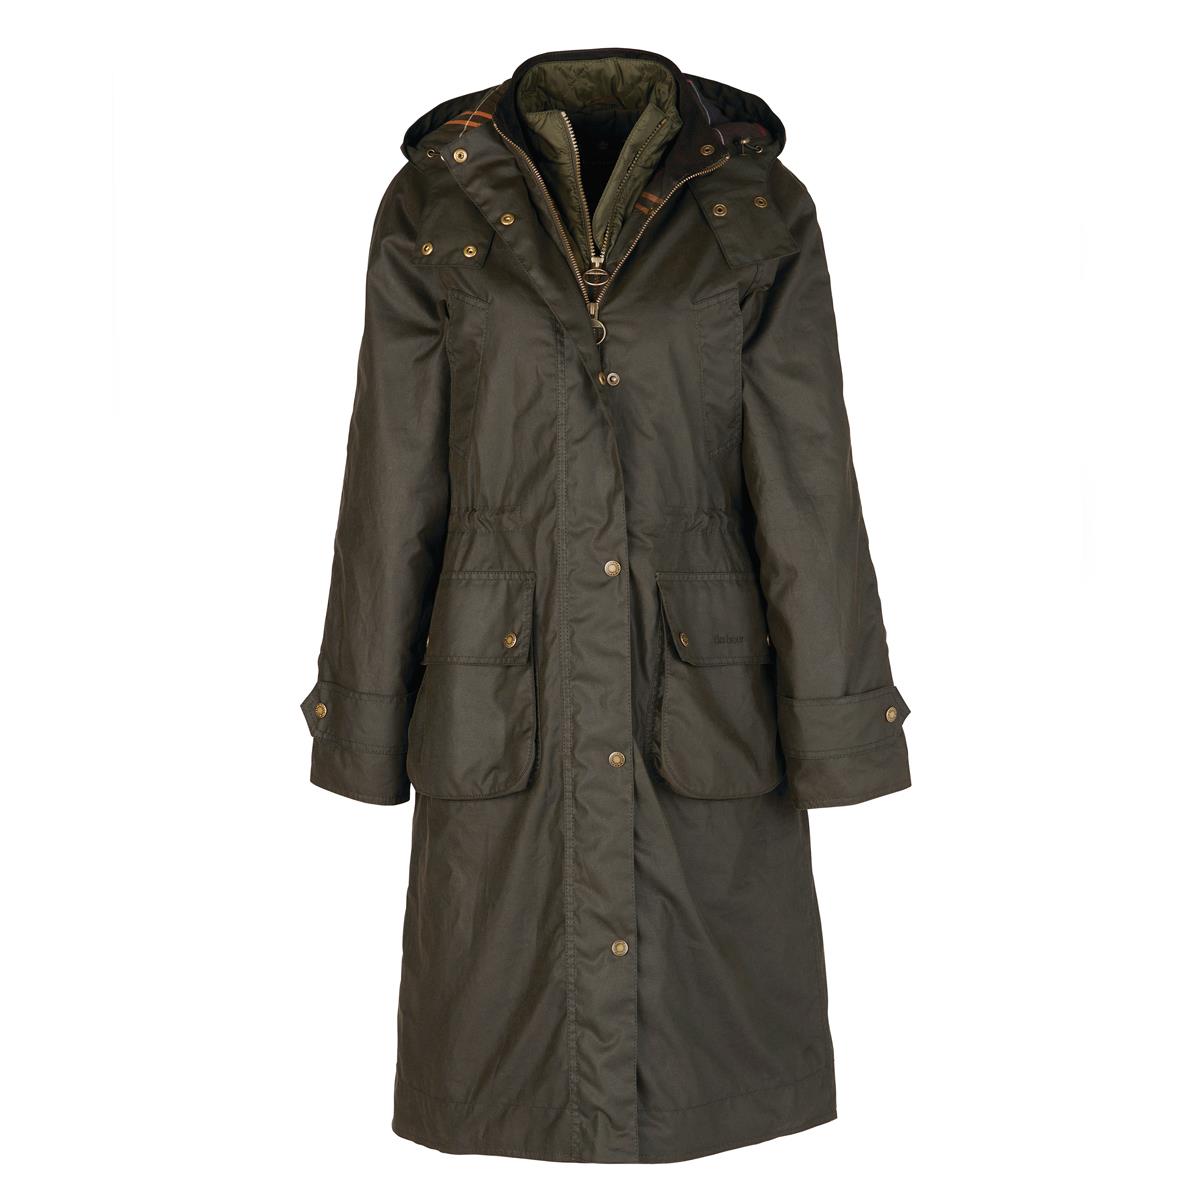 What is the PM reference for the Barbour Cannich Wax Jacket?